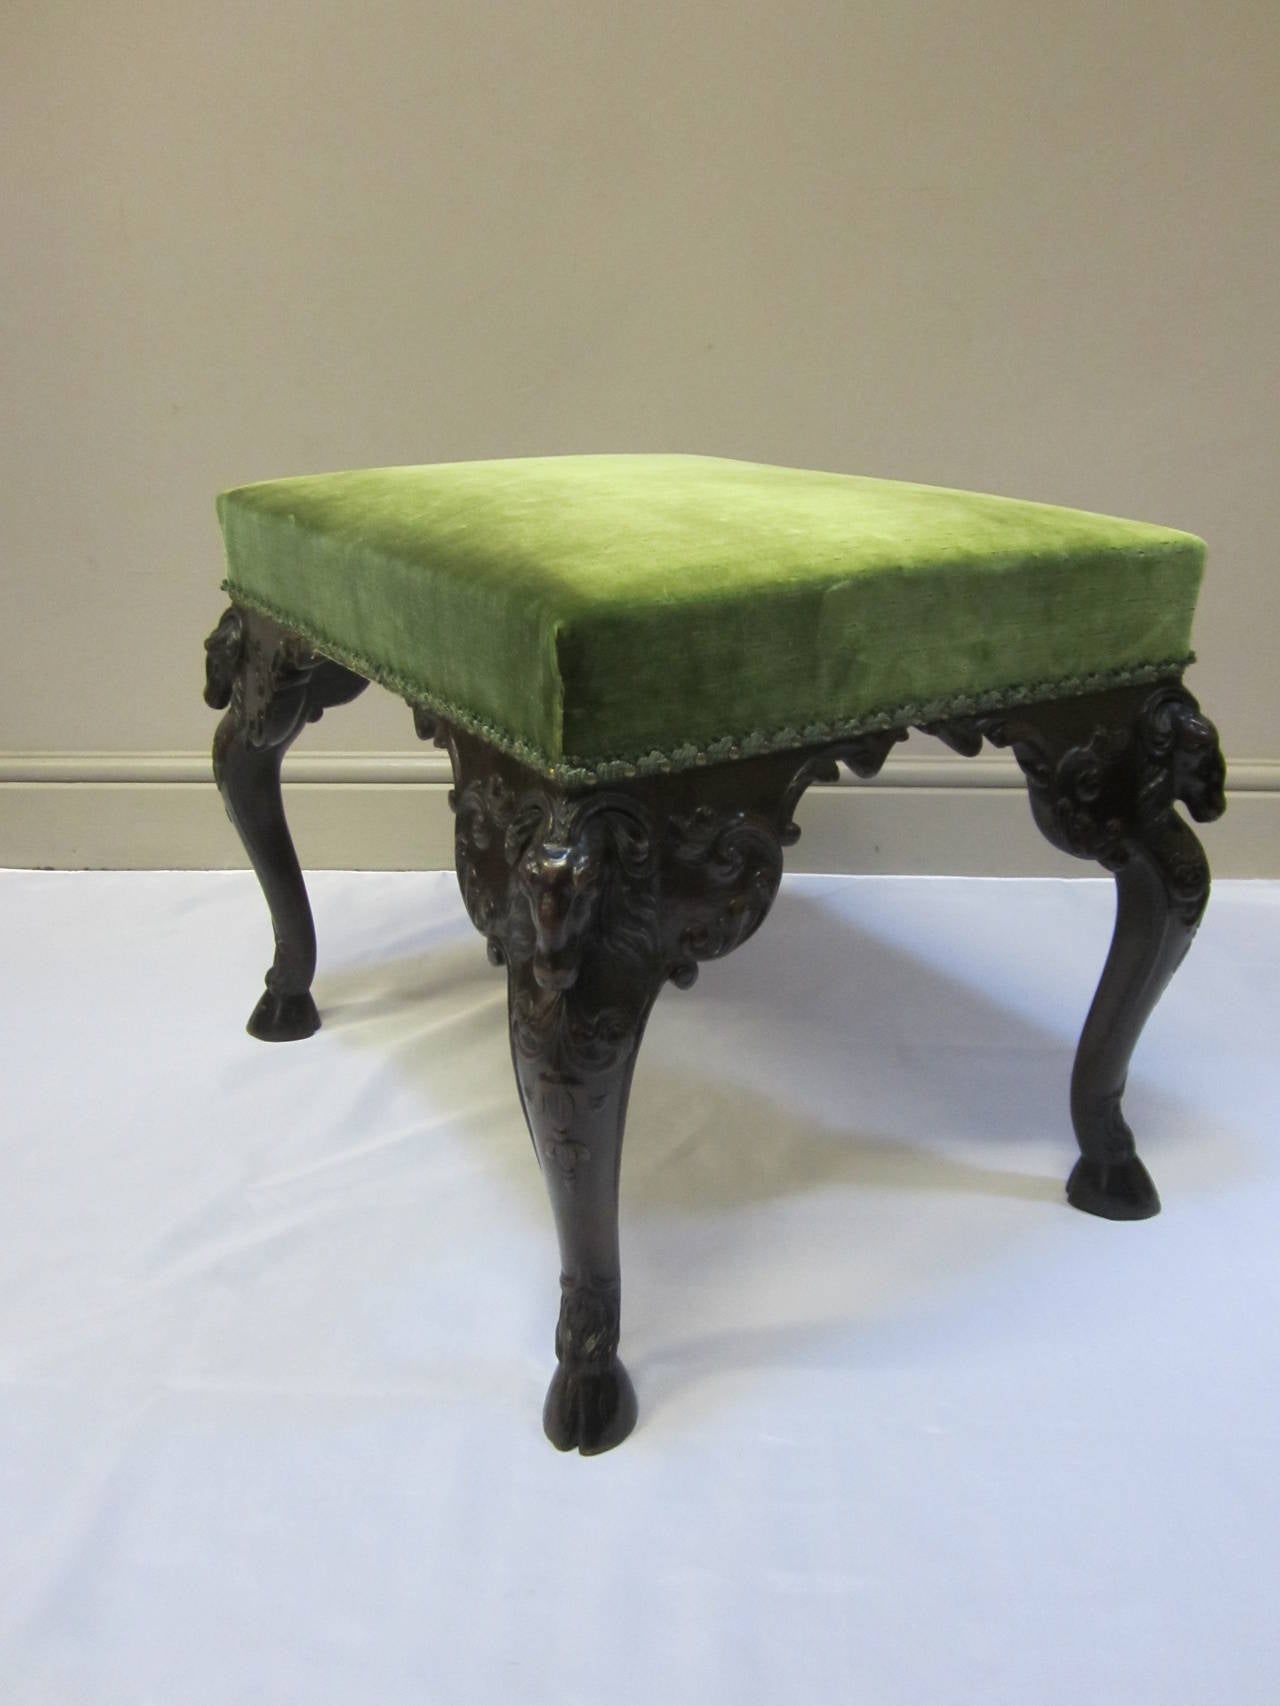 Fine 19th century stool, the deep mahogany frame with intricately carved rams heads on each corner, the cabriole legs sweeping generously concluding in a hoof base, the stool covered in a flecked green silk velvet material with a gimp and stud